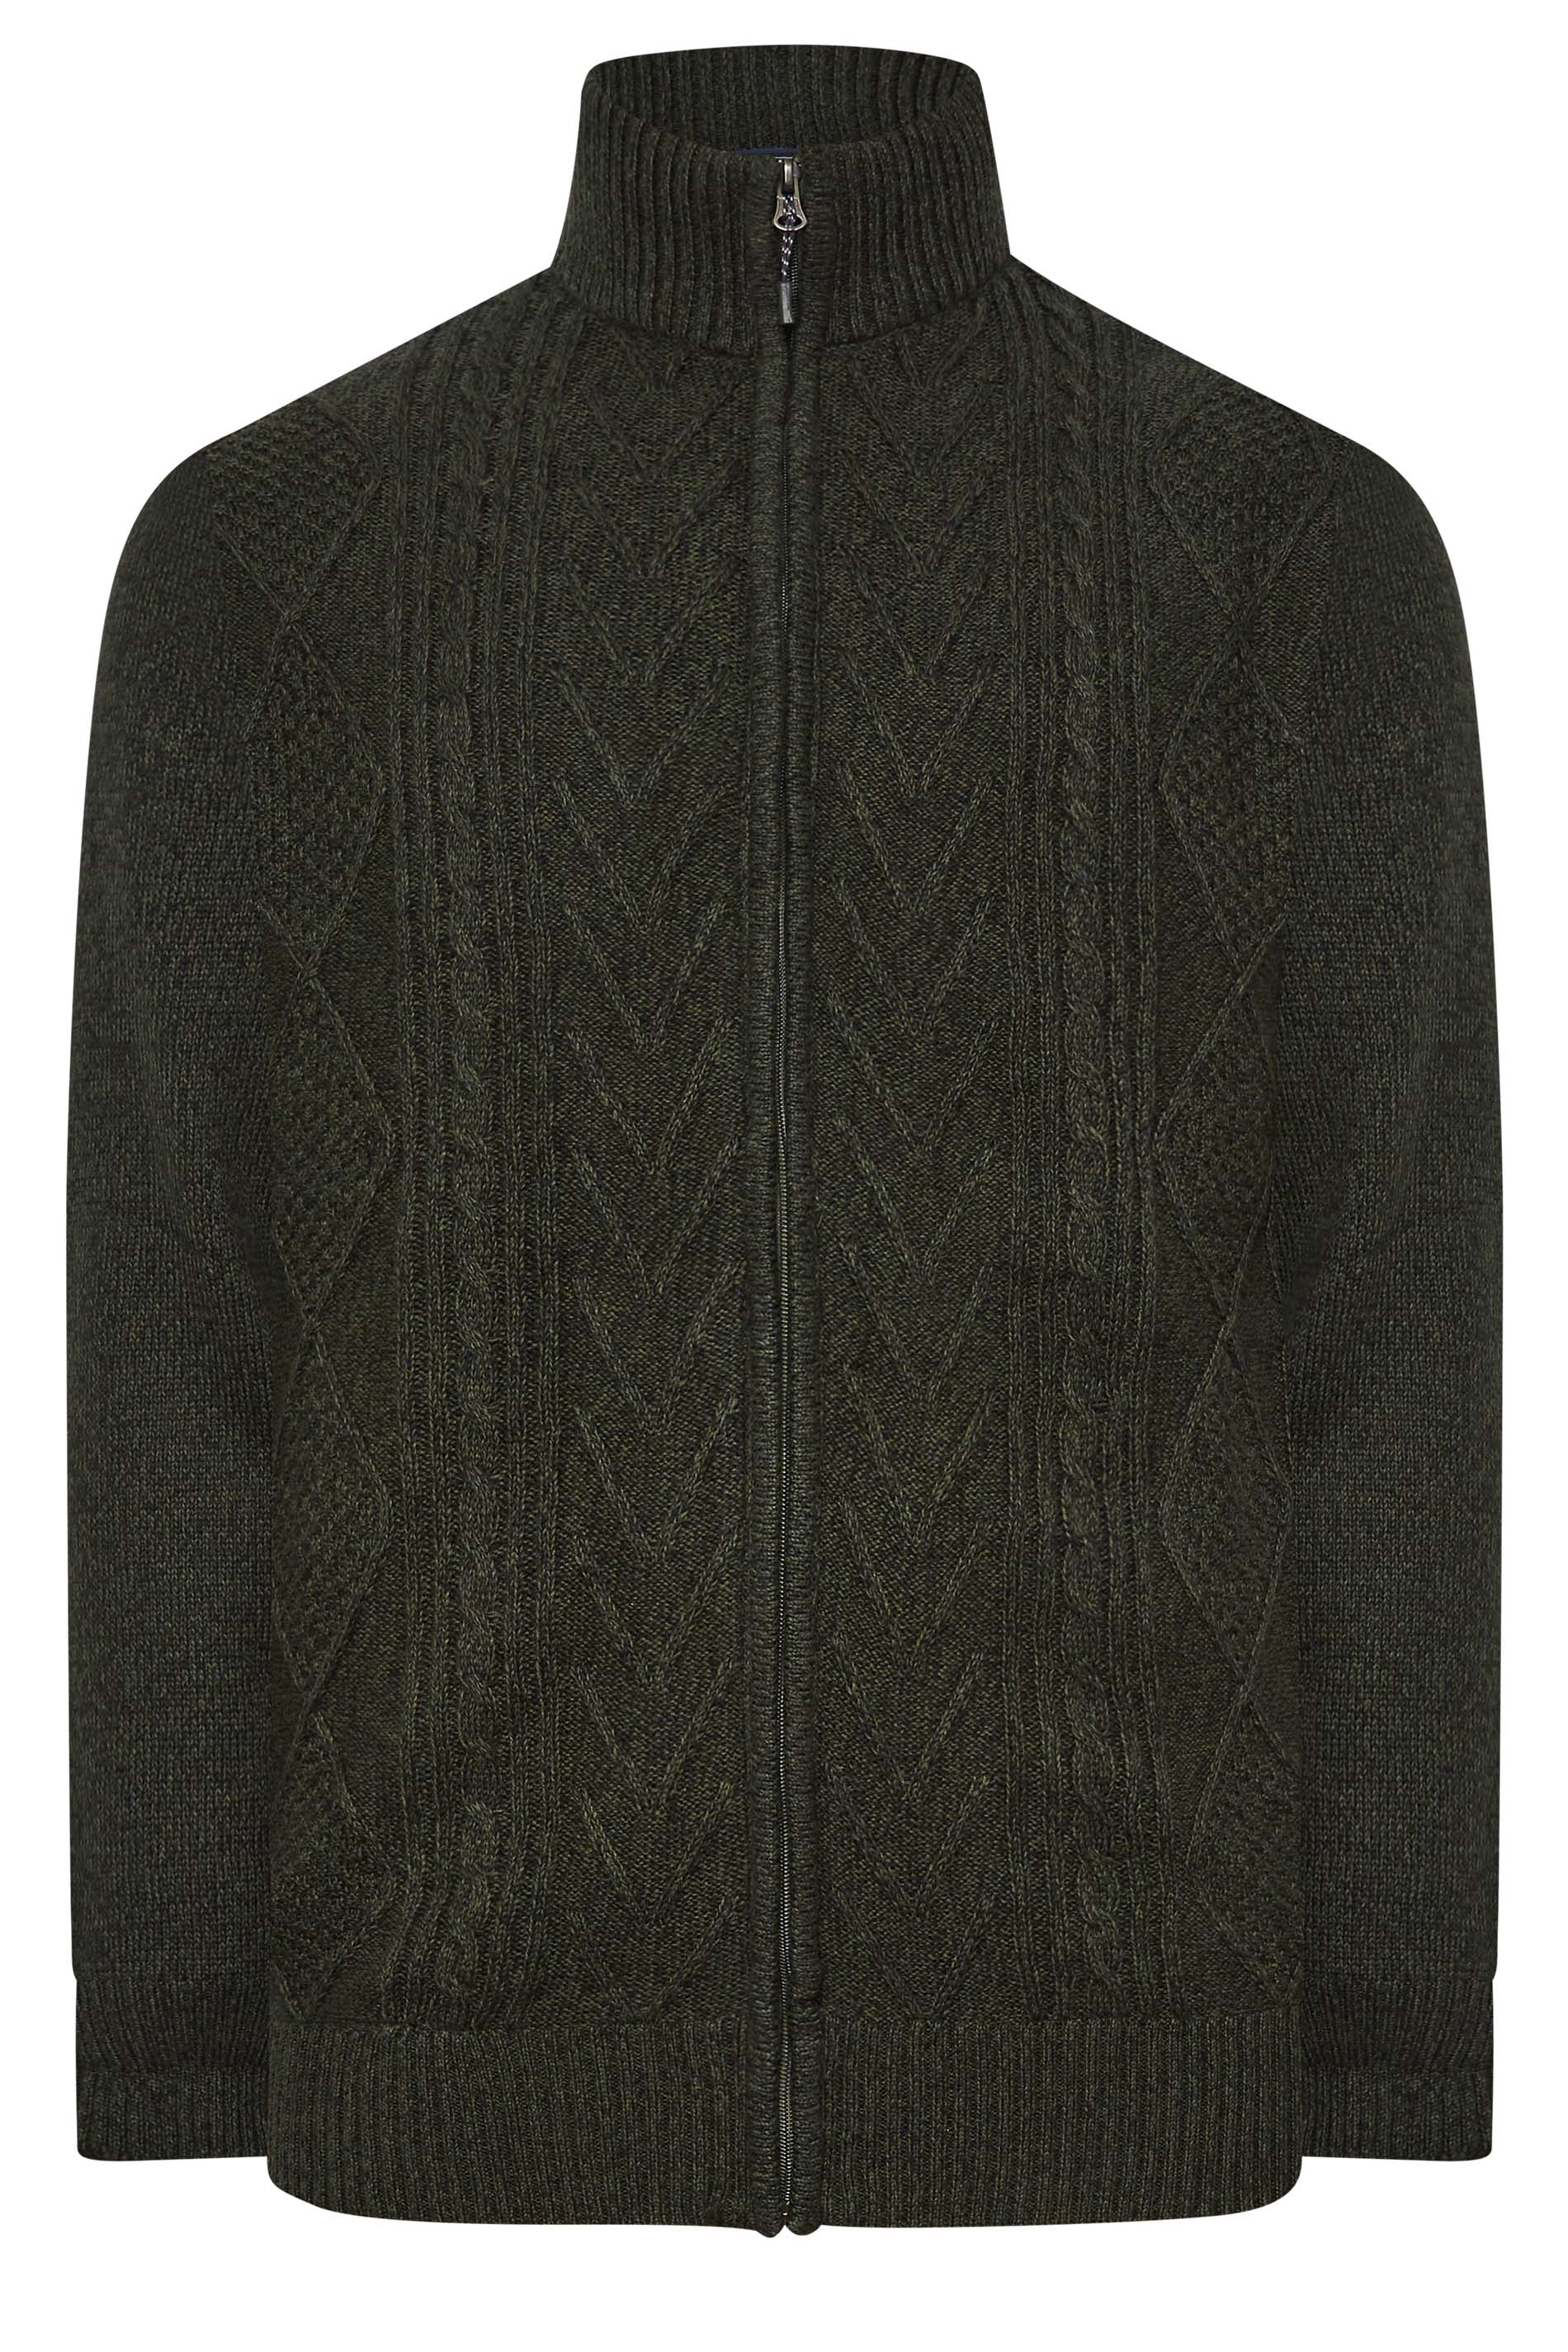 KAM Big & Tall Green Cable Knit Lined Cardigan | BadRhino 3